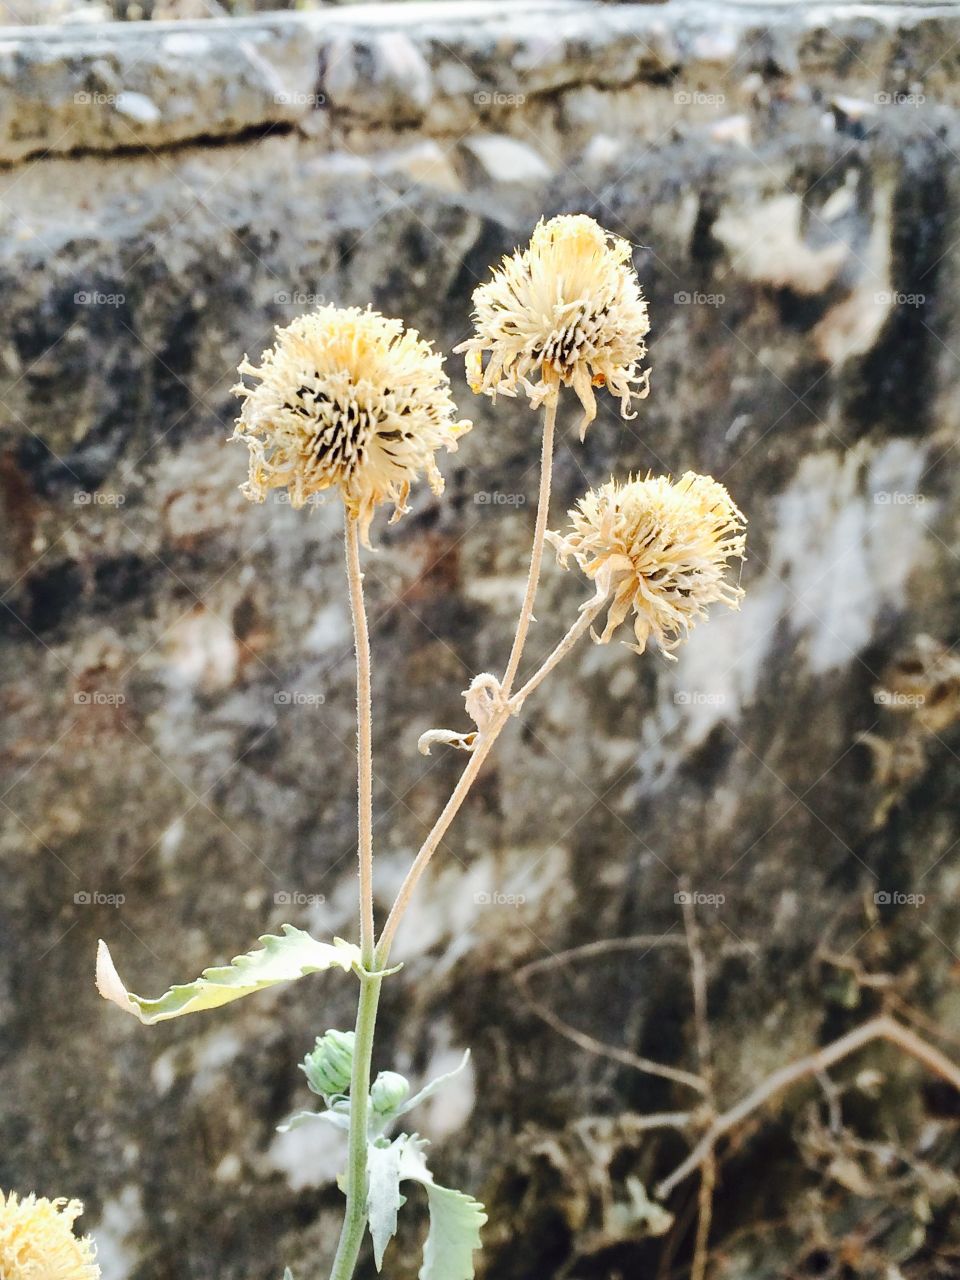 Dry flower and plant